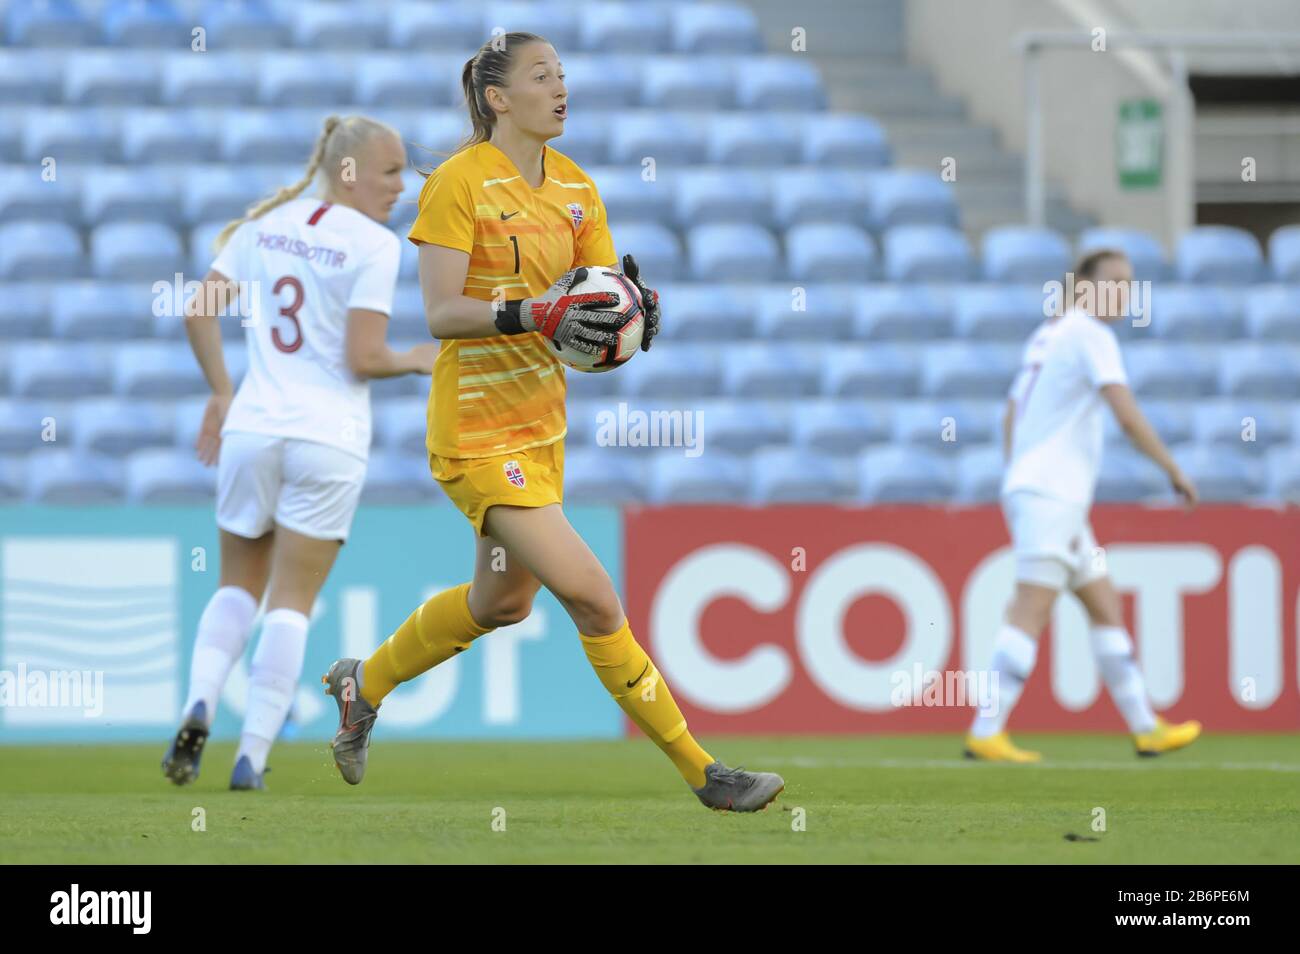 Faro, Portugal. 10th Mar, 2020. FARO, PORTUGAL. MAR 10th: 20200310 Faro, Portugal : Norwegian goalkeeper Cecilie Haustaker Fiskerstrand (1) pictured during the female football game between the national teams of New Zealand and Norway on the third matchday of the Algarve Cup 2020, a prestigious friendly womensoccer tournament in Portugal, on Tuesday 10 th March 2020 in Faro, Portugal . PHOTO SPORTPIX.BE | STIJN AUDOOREN Stijn Audooren/SPP-Sportpix Credit: SPP Sport Press Photo. /Alamy Live News Stock Photo